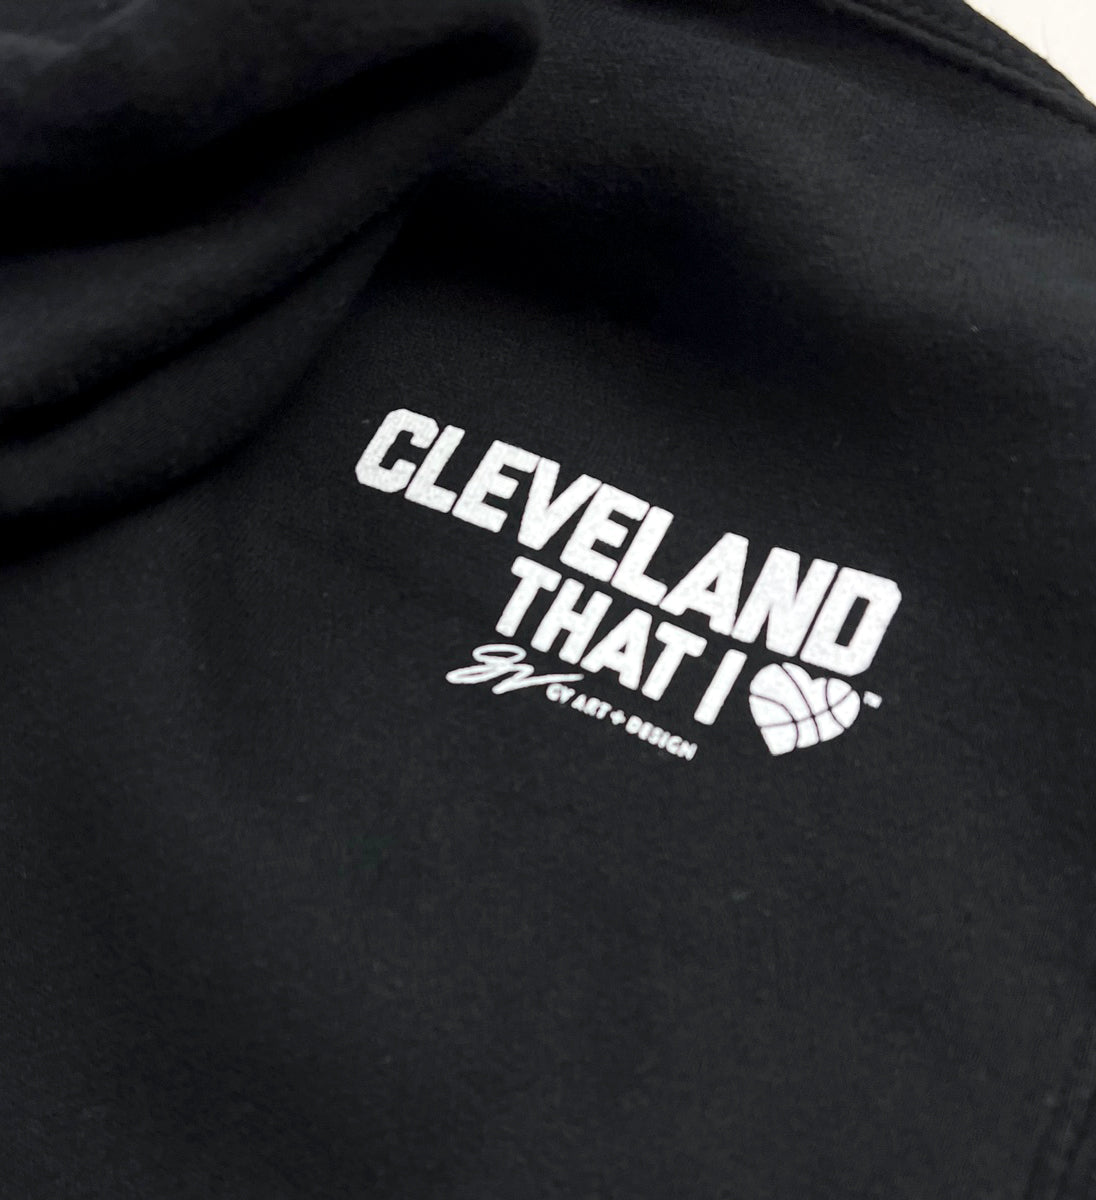 Mistakes on The Lake Retro Cleveland Basketball Hoodie 2XL